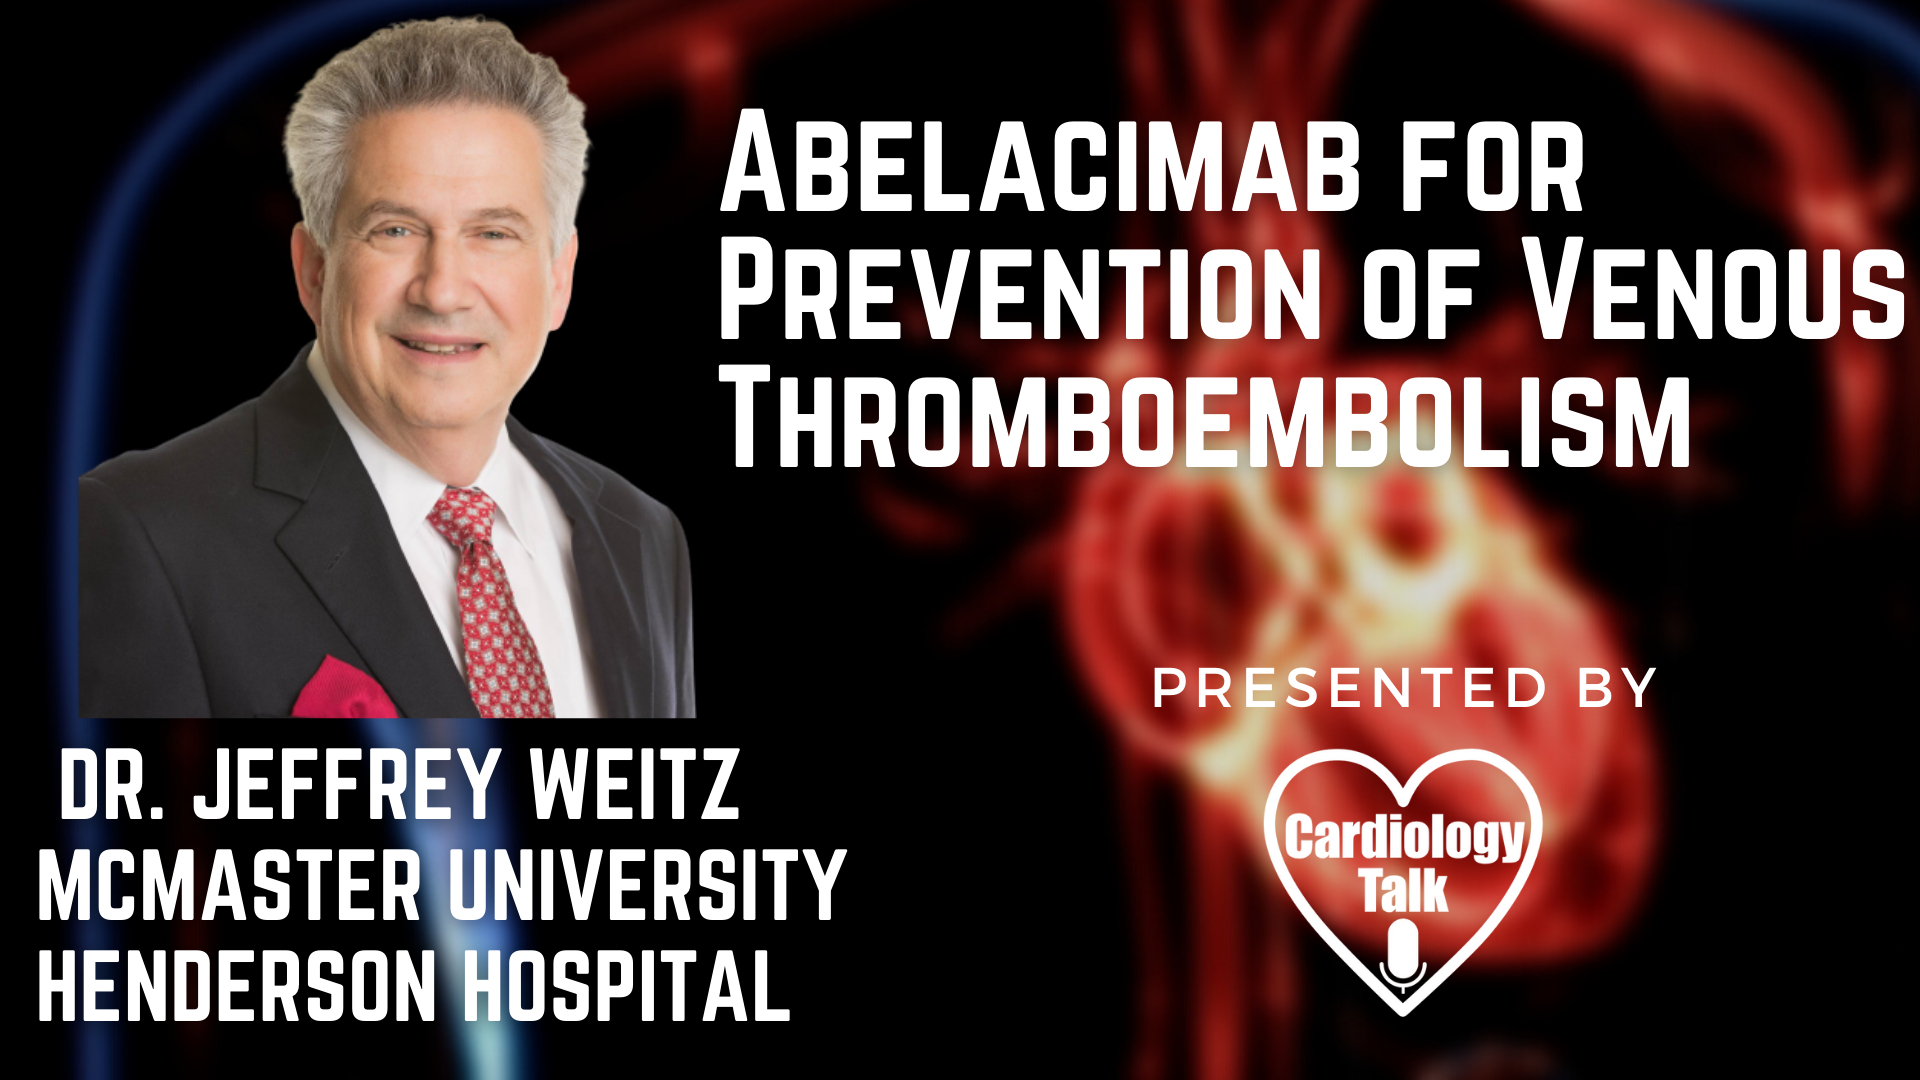 Dr. Jeffrey Weitz, M.D. -@Cardio_KULeuven #VenousThromboembolism #Cardiology #Research  Abelacimab for Prevention of Venous Thromboembolism